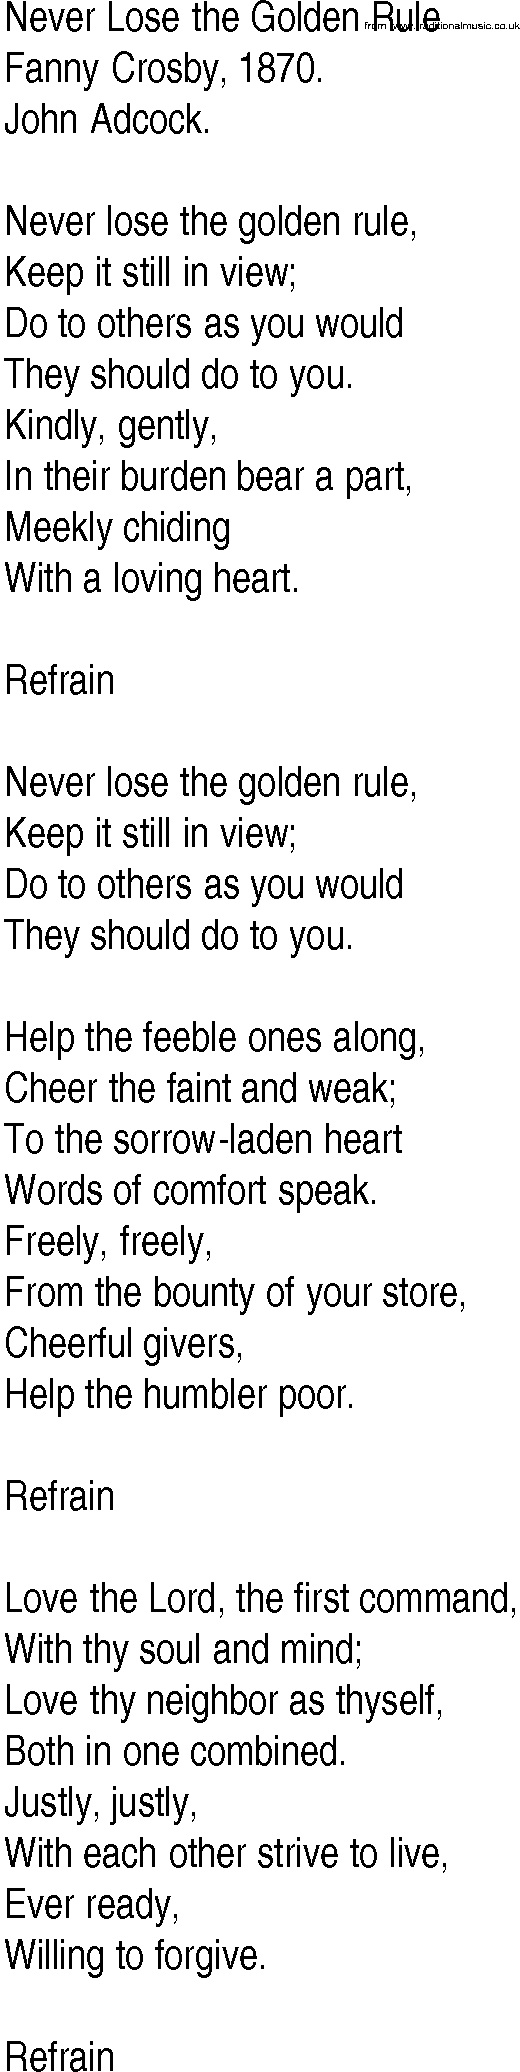 Hymn and Gospel Song: Never Lose the Golden Rule by Fanny Crosby lyrics